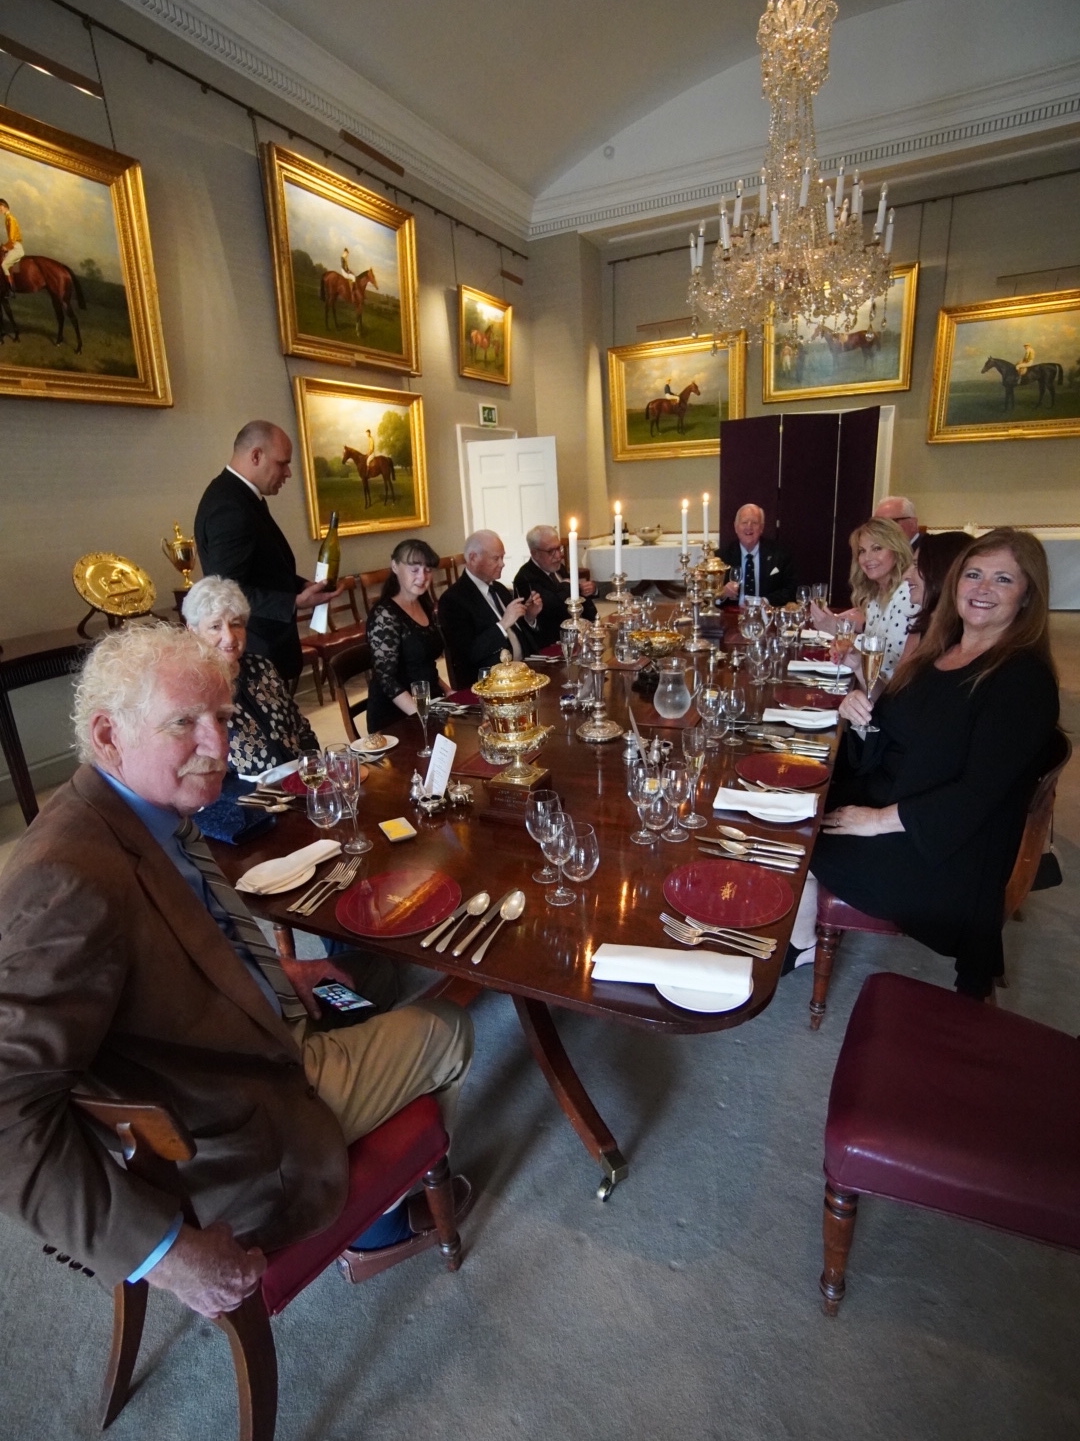 Dinner party: Team Valor partners enjoy a meal at the historic Jockey Club Rooms. Photo: Clark Spencer